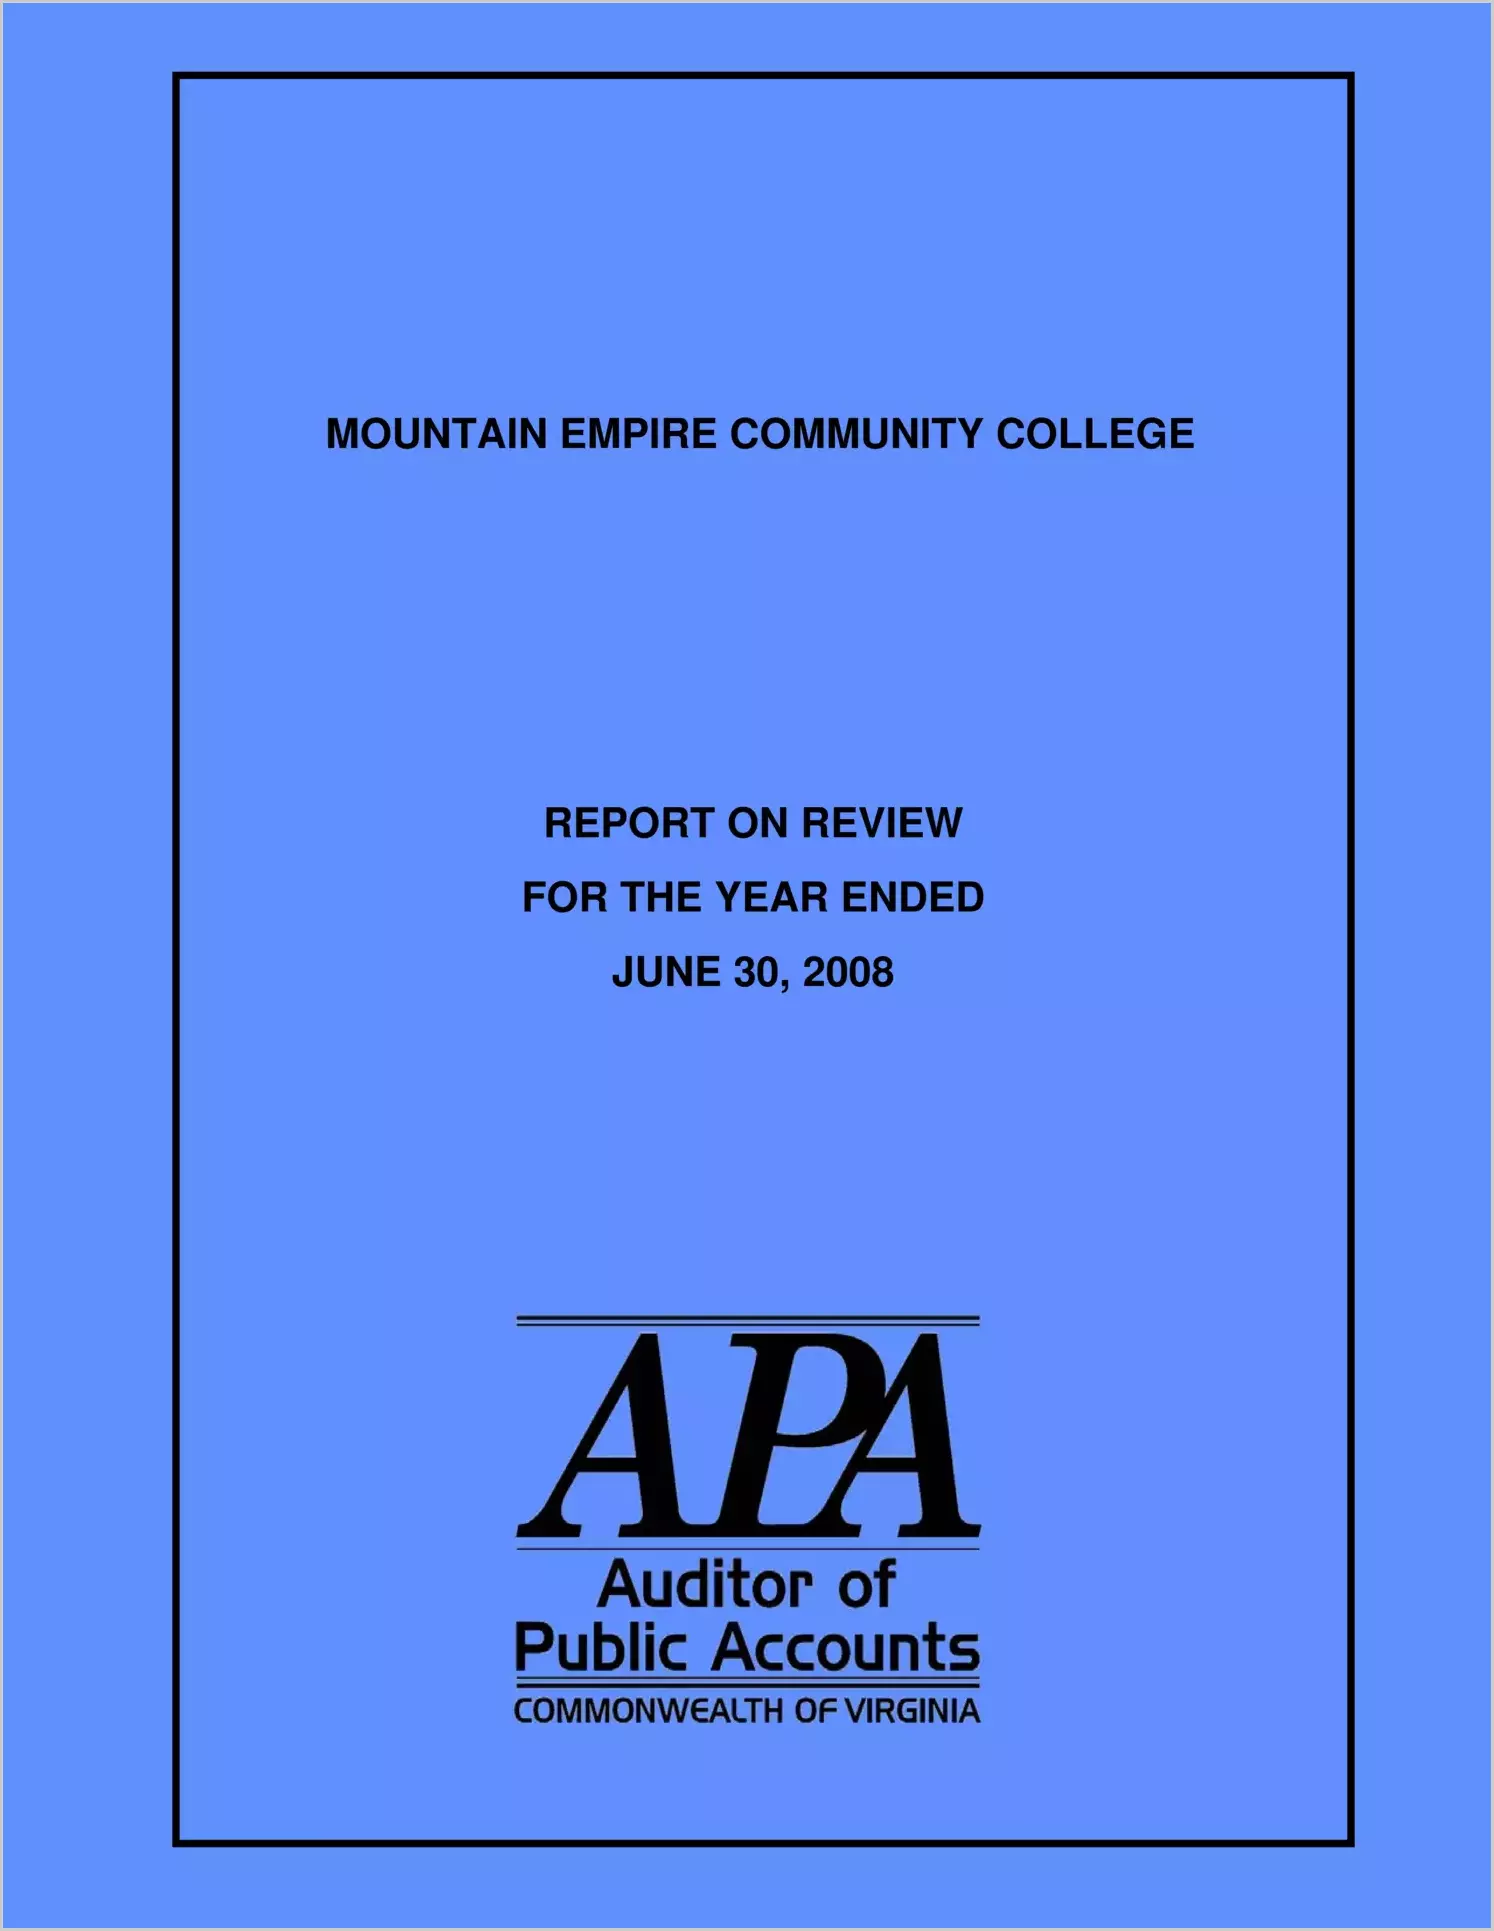 Mountain Empire Community College report on review for the year ended June 30, 2008